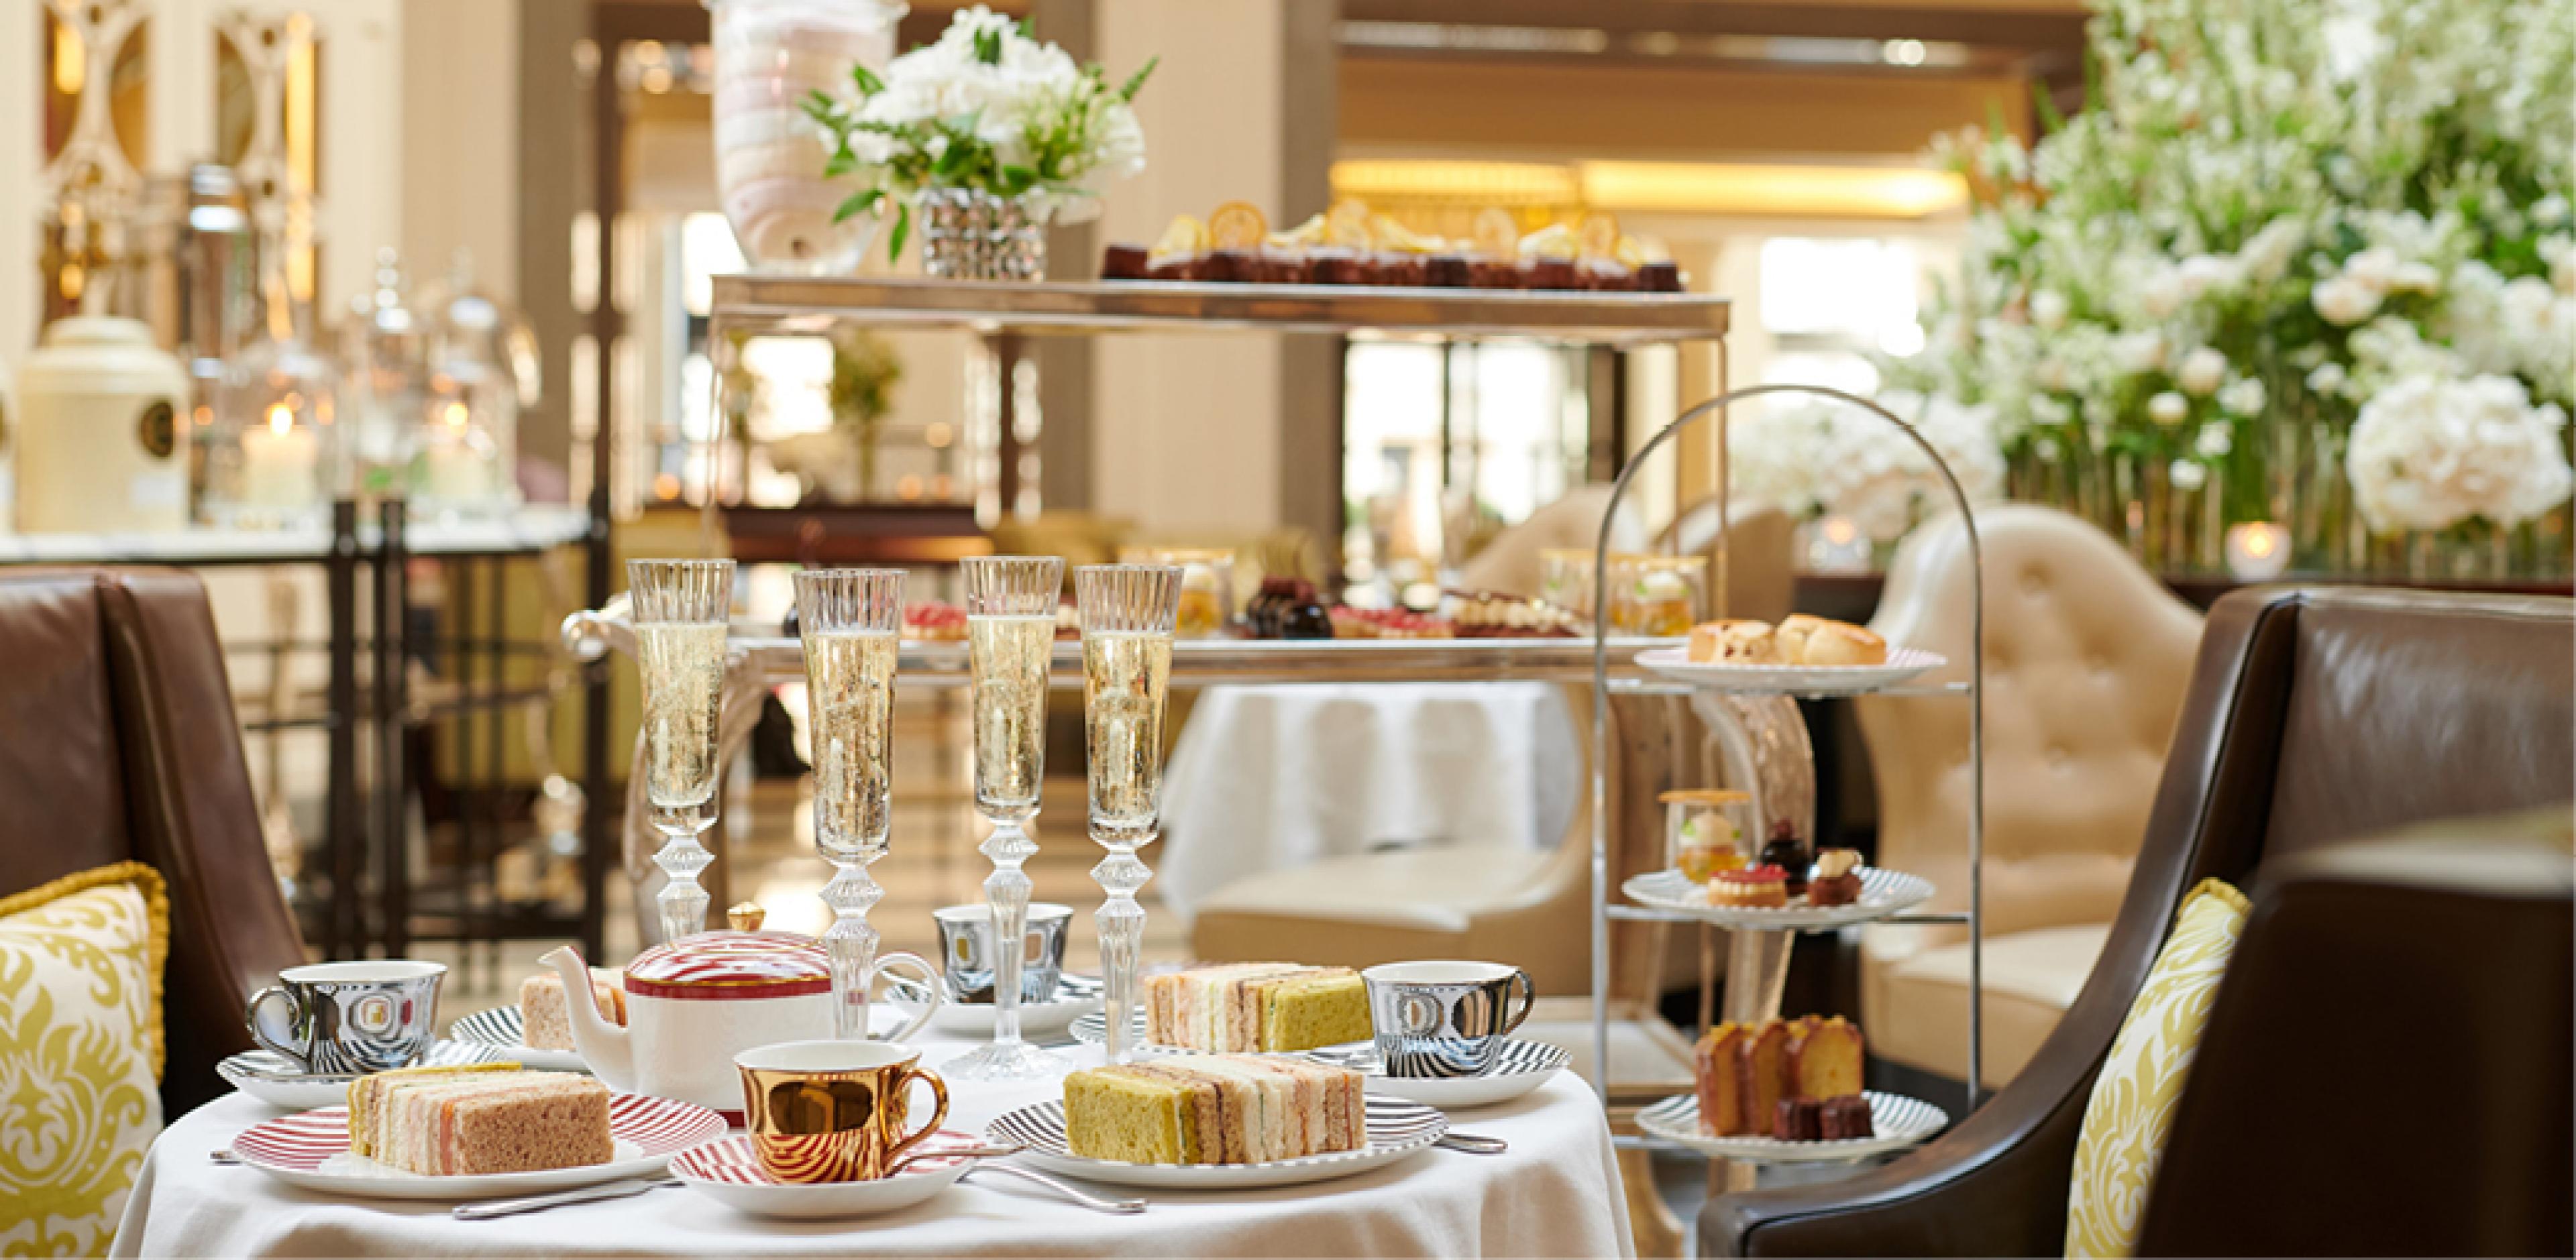 Afternoon tea at the Corinthia London's Crystal Moon Lounge